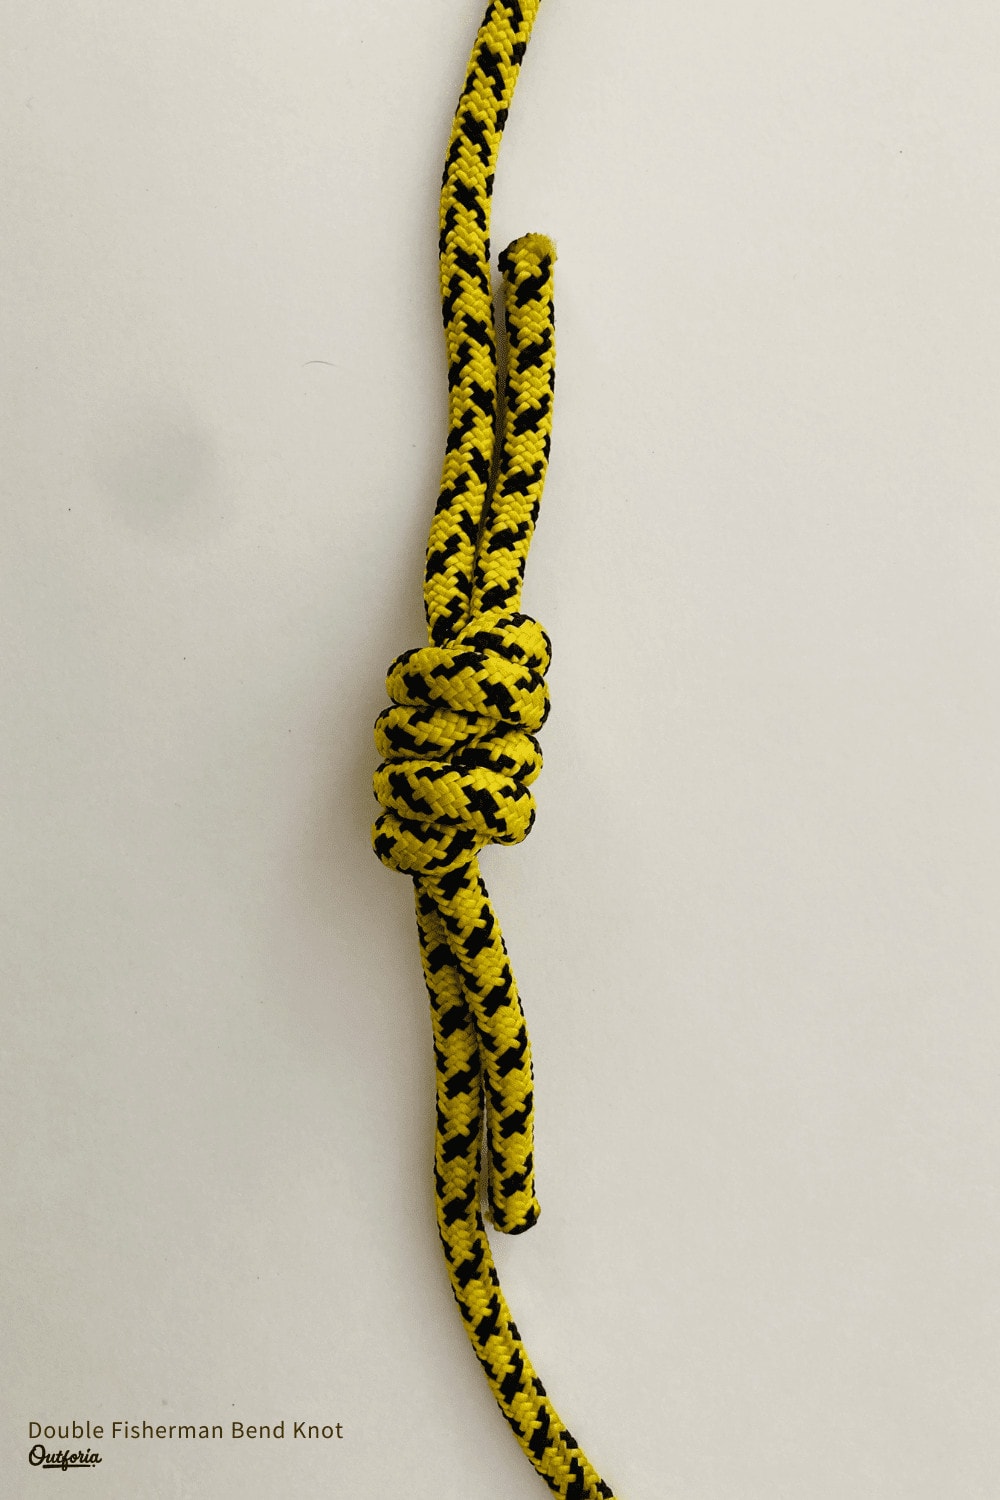 Double Fisherman Bend Knot